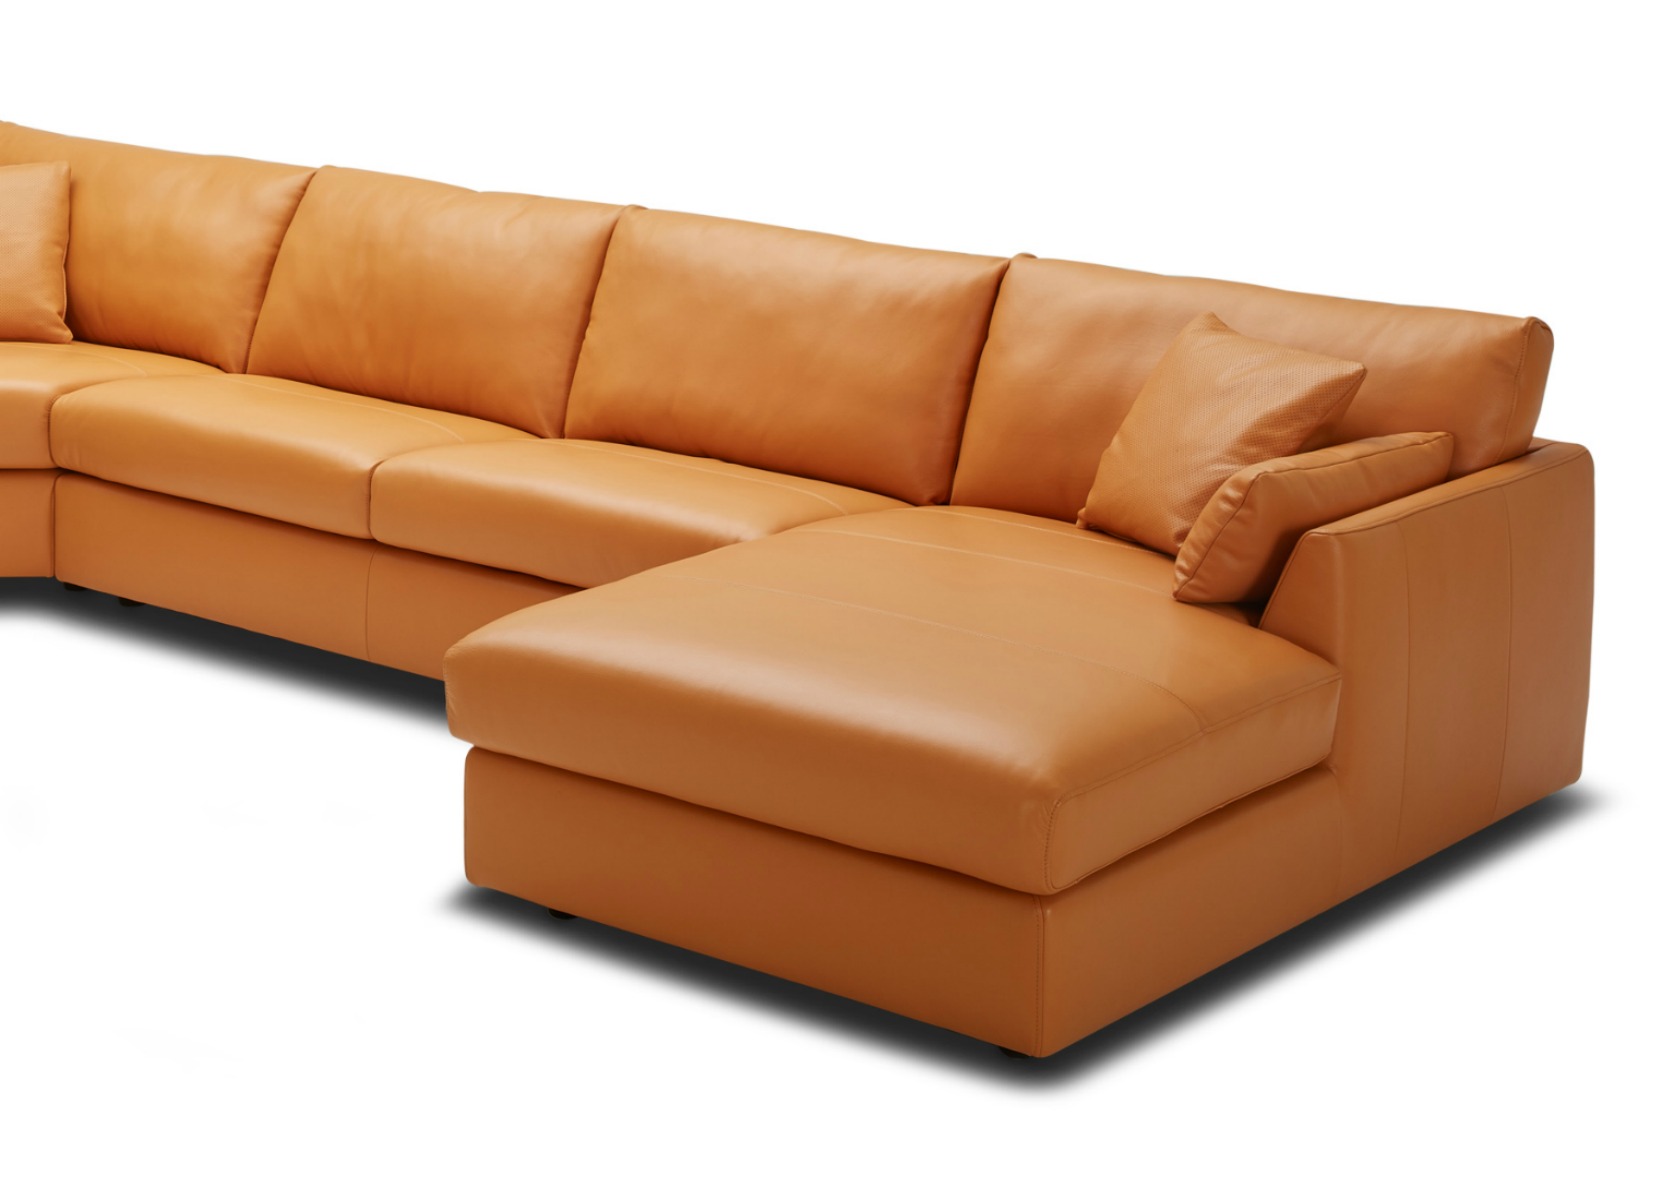 just seat protector for leather sofa